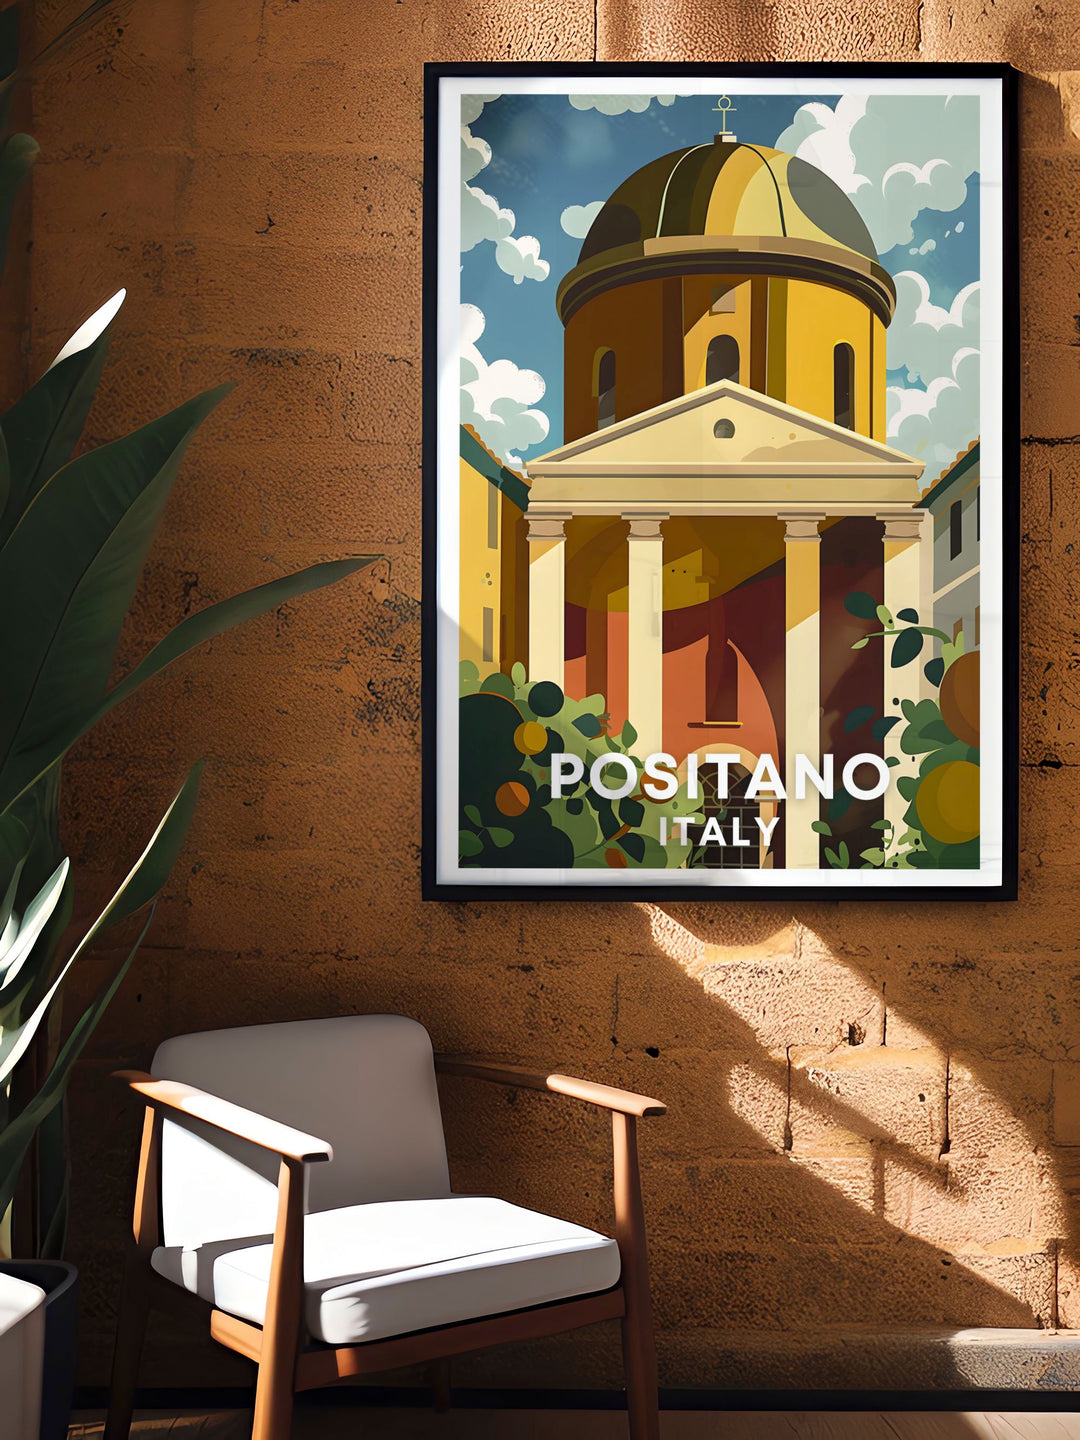 The Chiesa di Santa Maria Assunta print from Positano ideal for wall decor that reflects the charm of the Amalfi Coast this art piece brings a touch of Italian sophistication and coastal beauty to your home